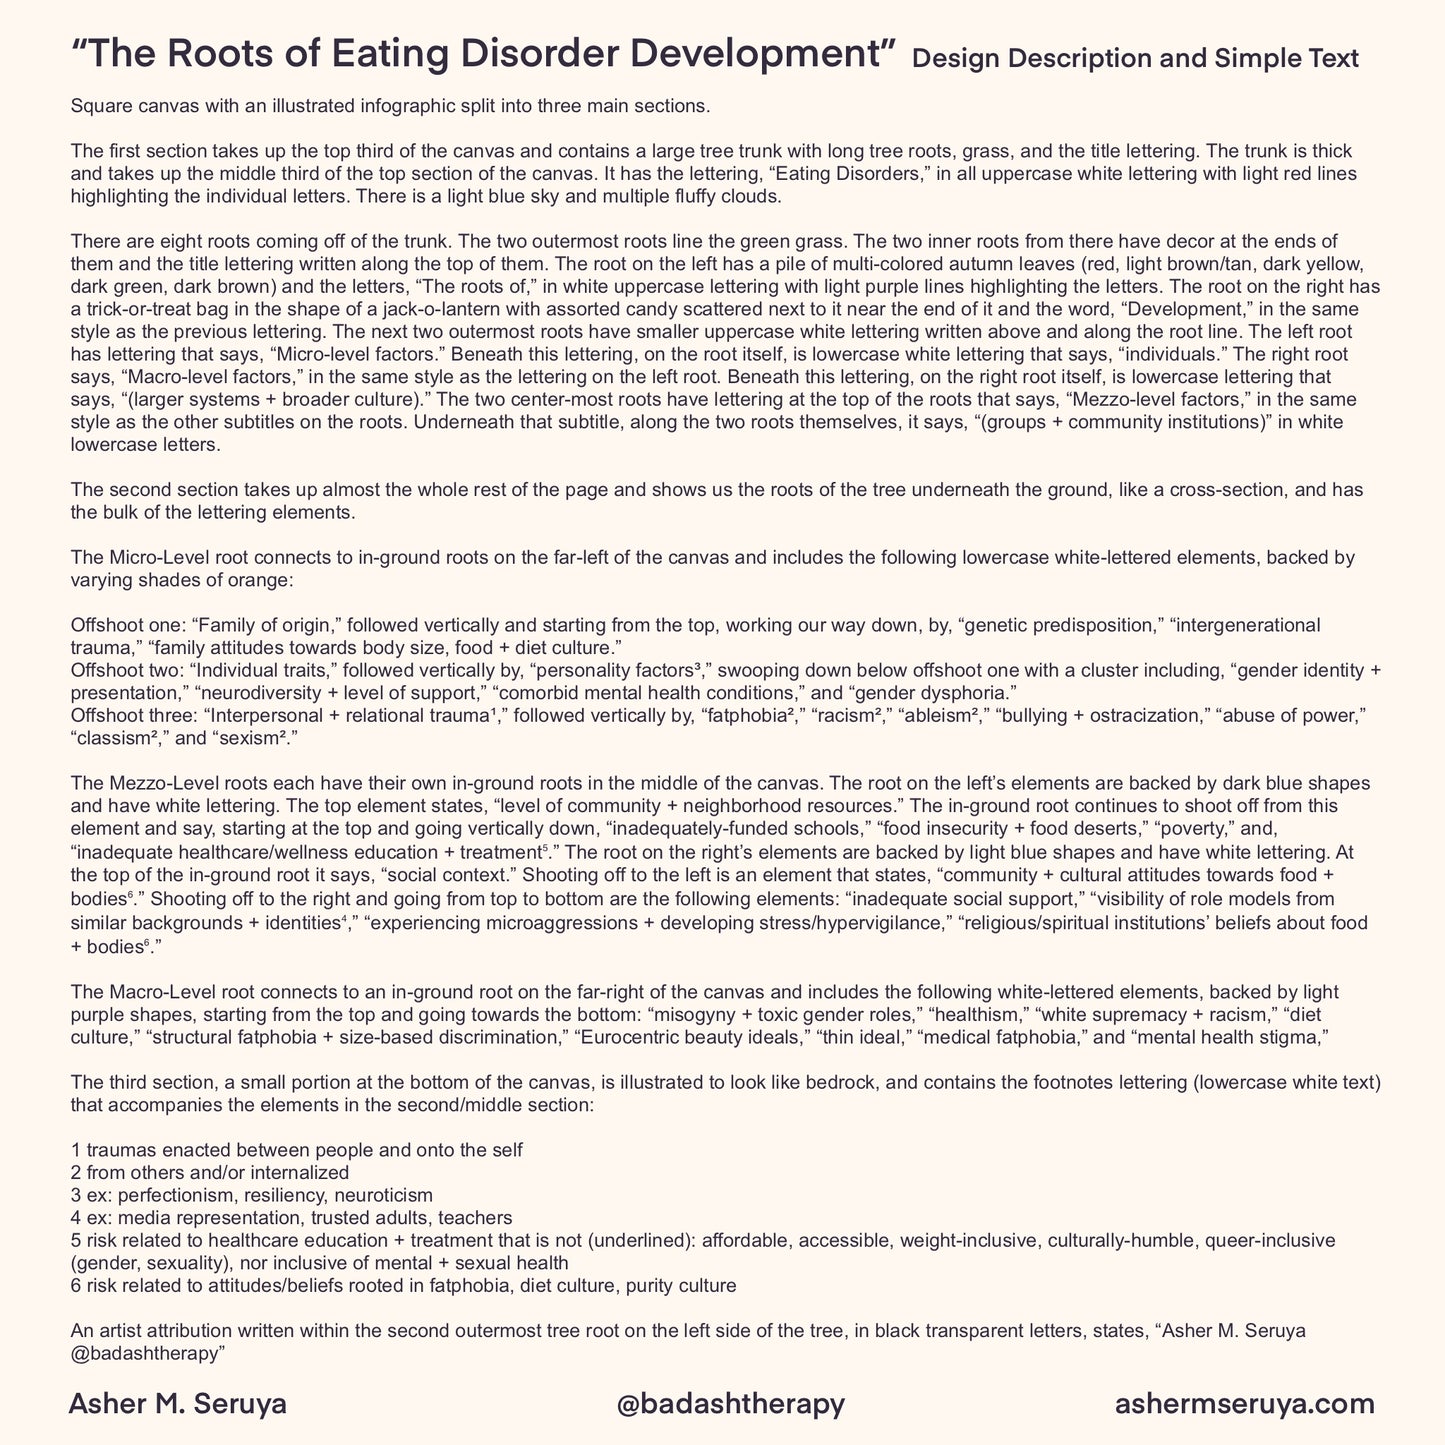 The Roots of Eating Disorder Development Digital Artwork - Illustrated Infographic